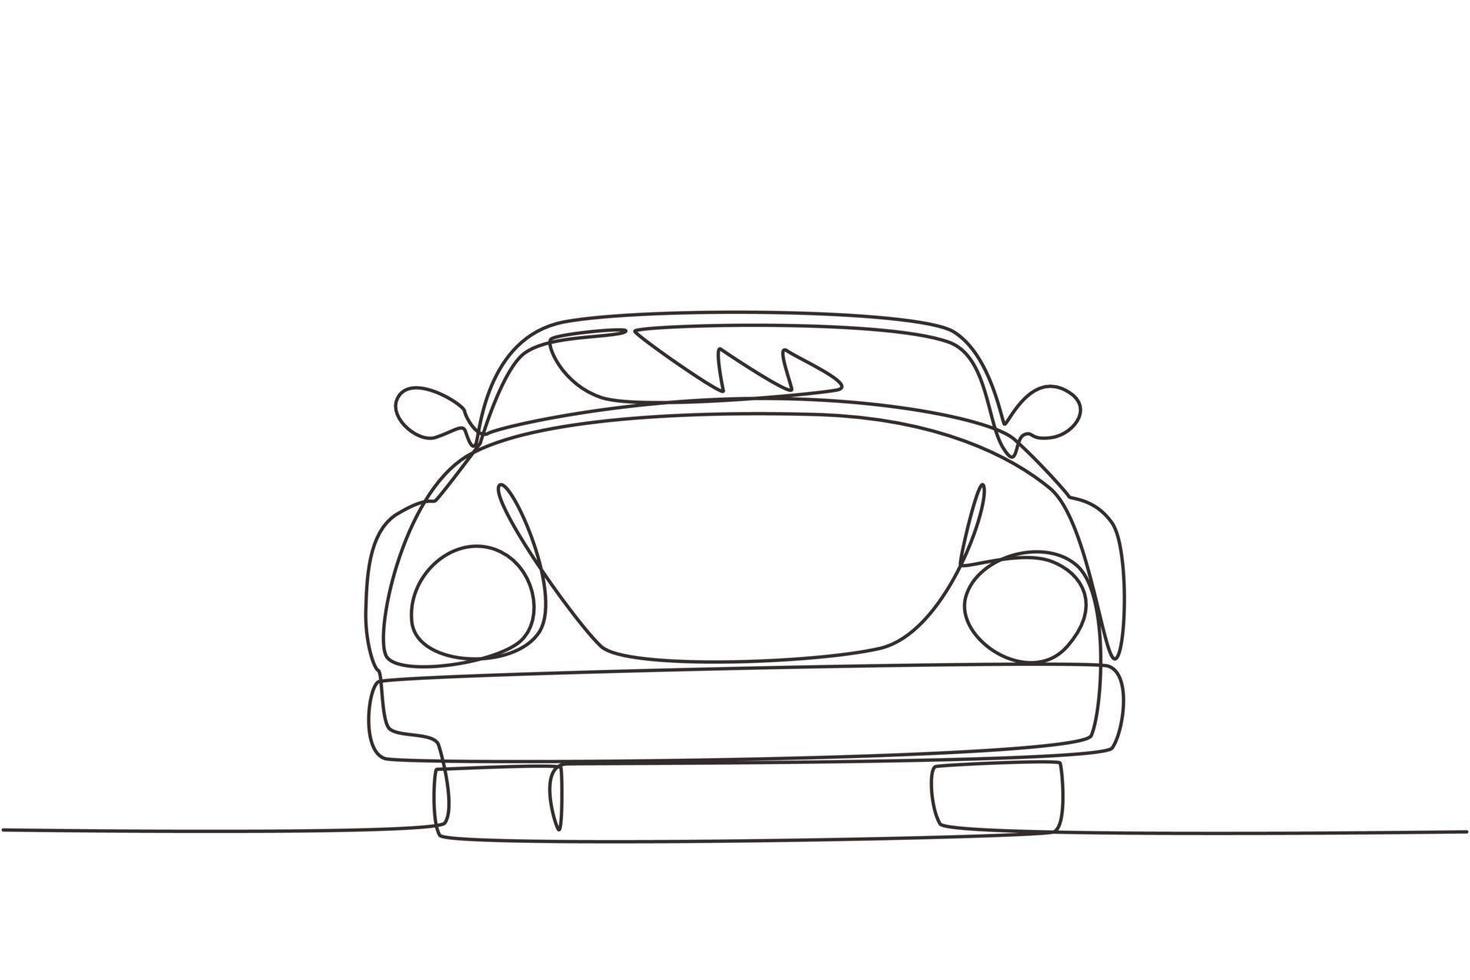 Single one line drawing cabriolet car. Beauty sport business comfortable cabrio automobile supercar. Classic retro motor vehicle model. Modern continuous line draw design graphic vector illustration